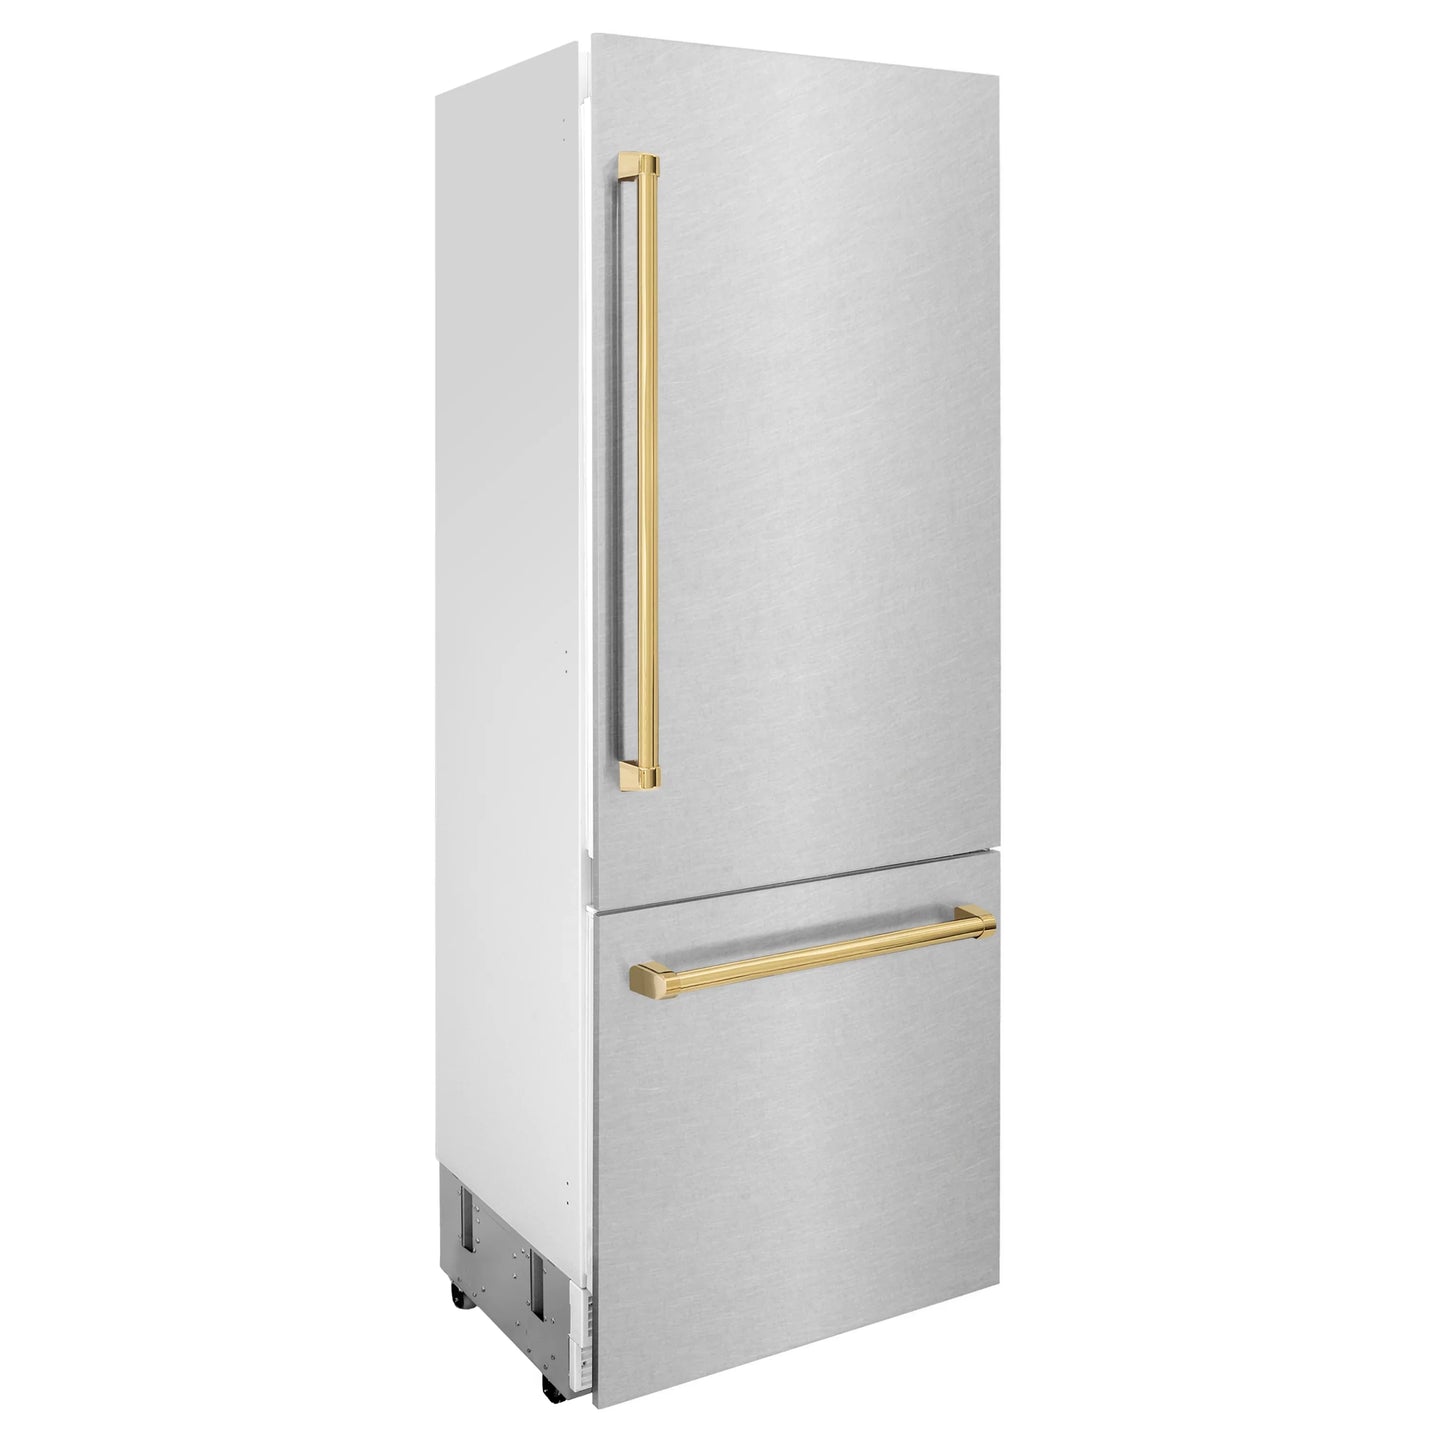 ZLINE 30" Autograph Built-In Refrigerator with Internal Water and Ice Dispenser in with Gold Accents